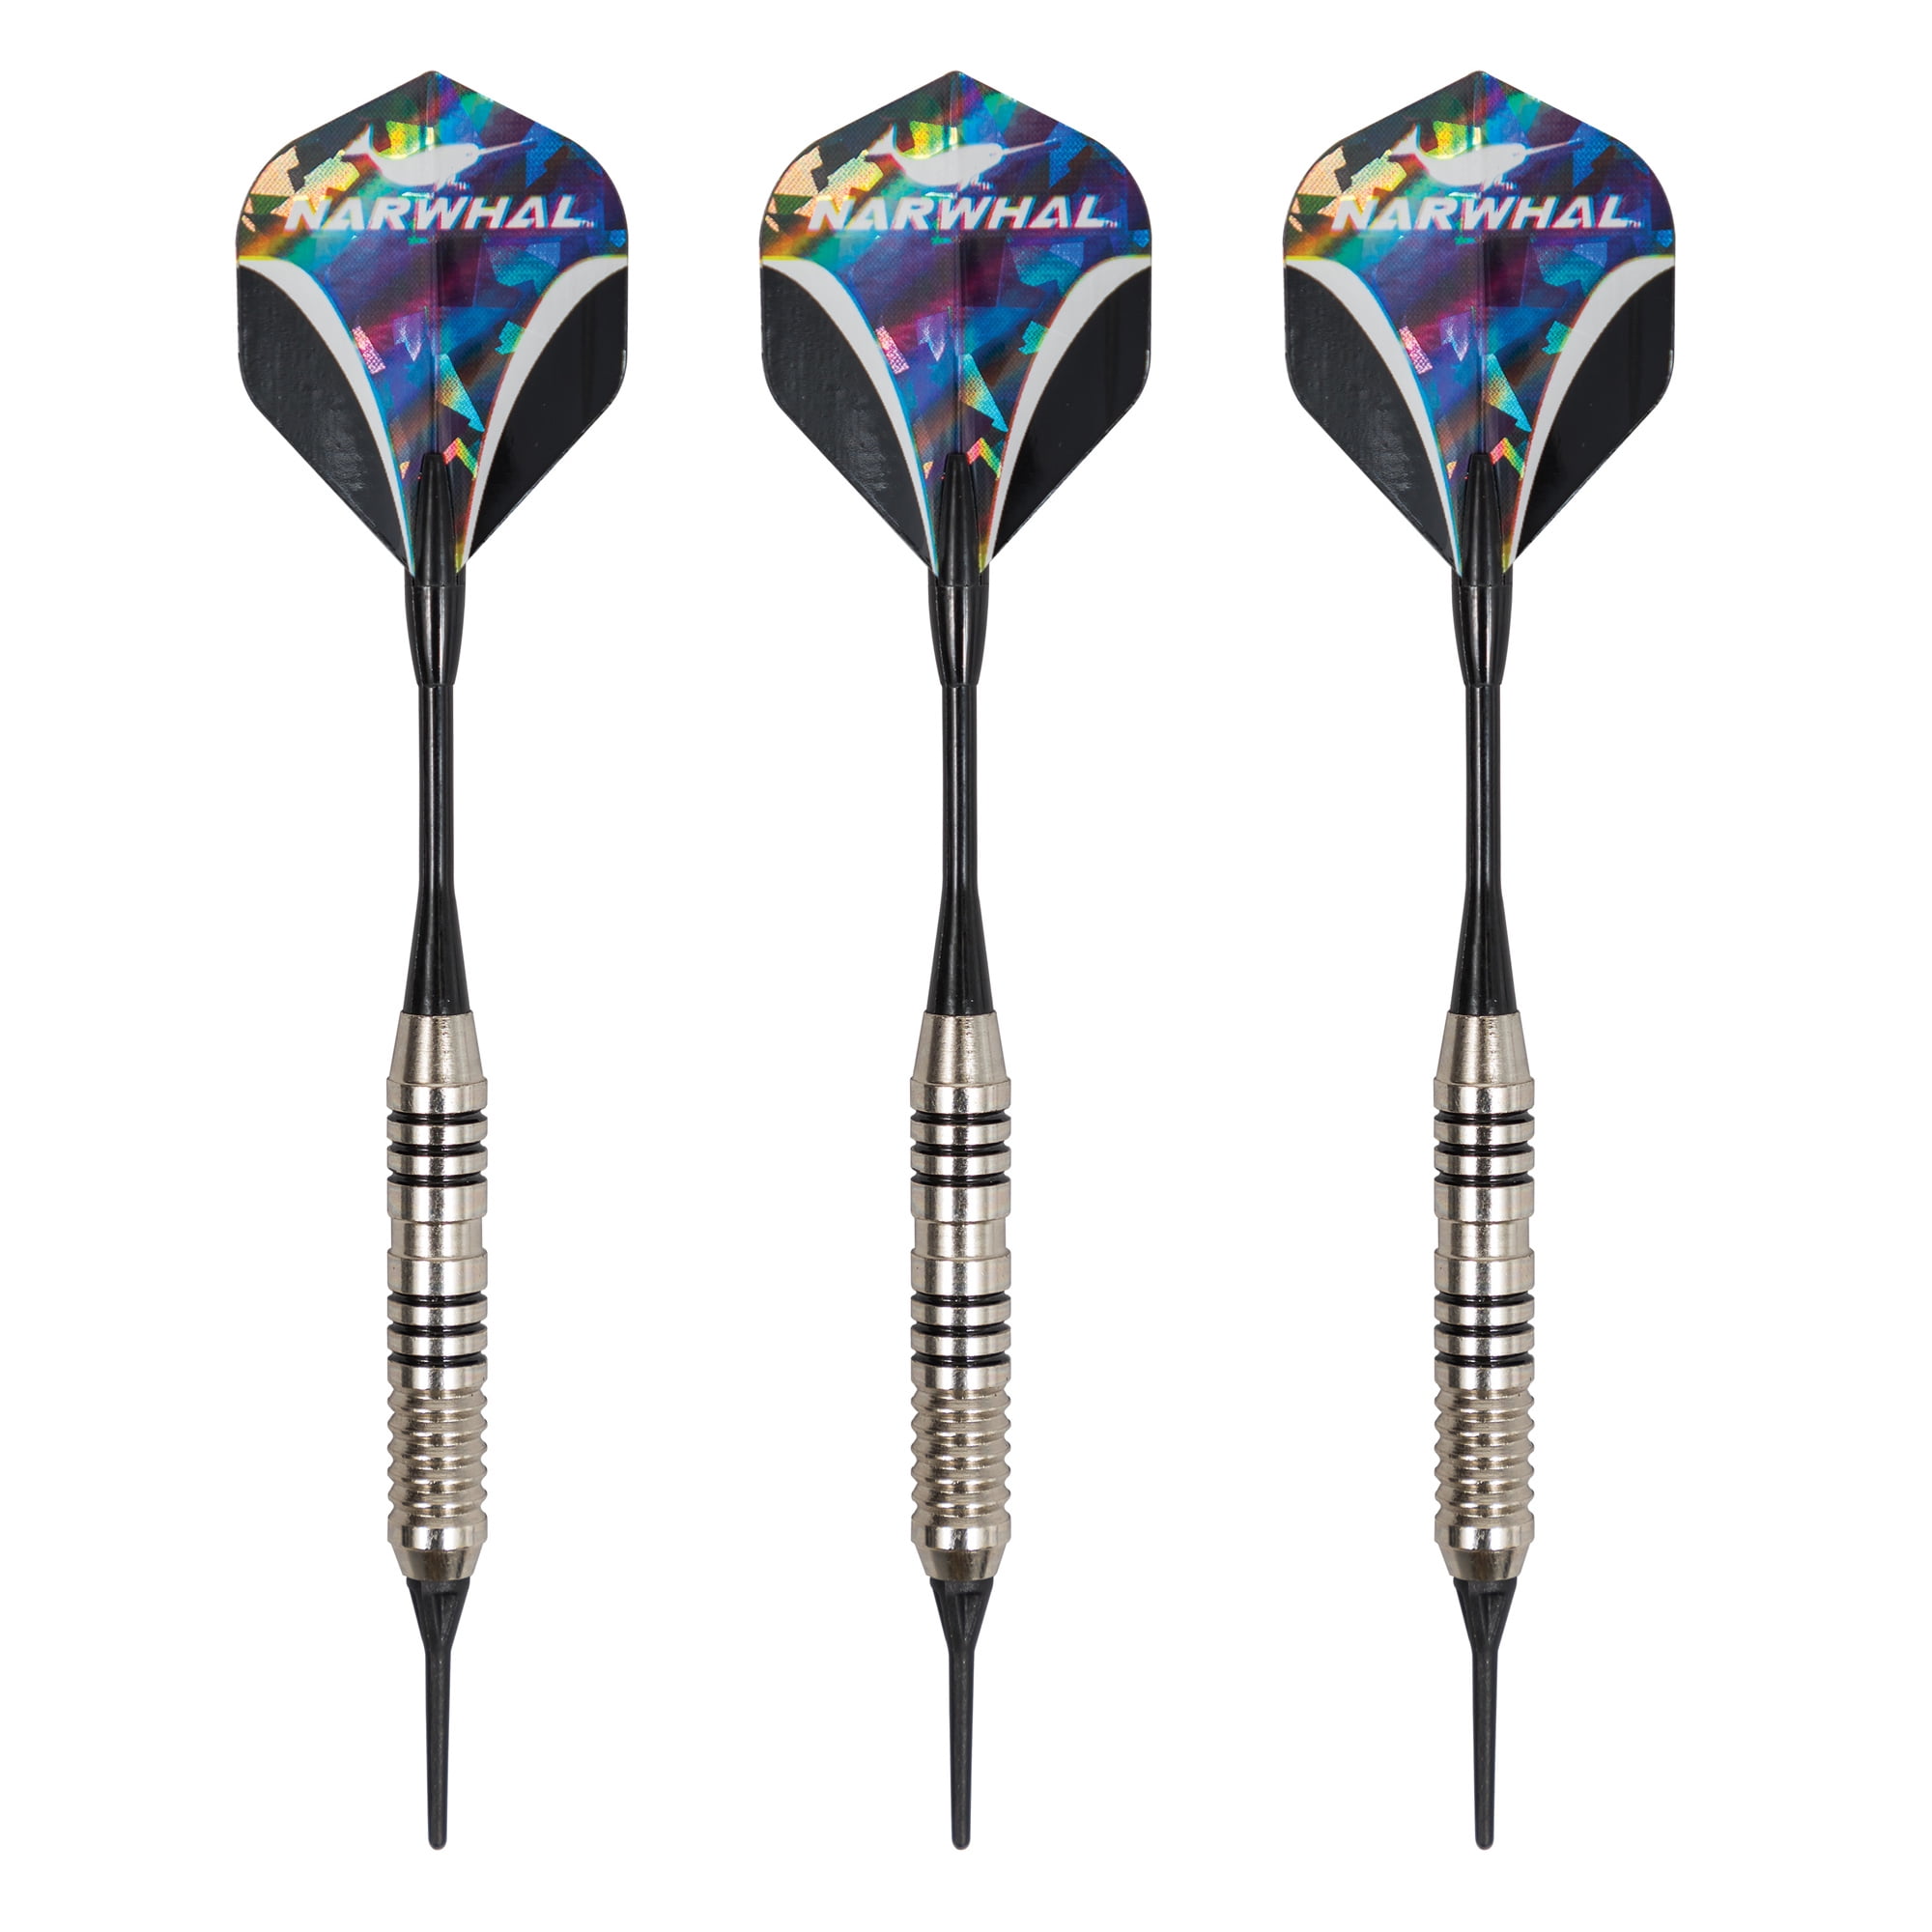 Soft Darts Set for Electronic Dartboard 18g 12 Packs Darts with National Flags 